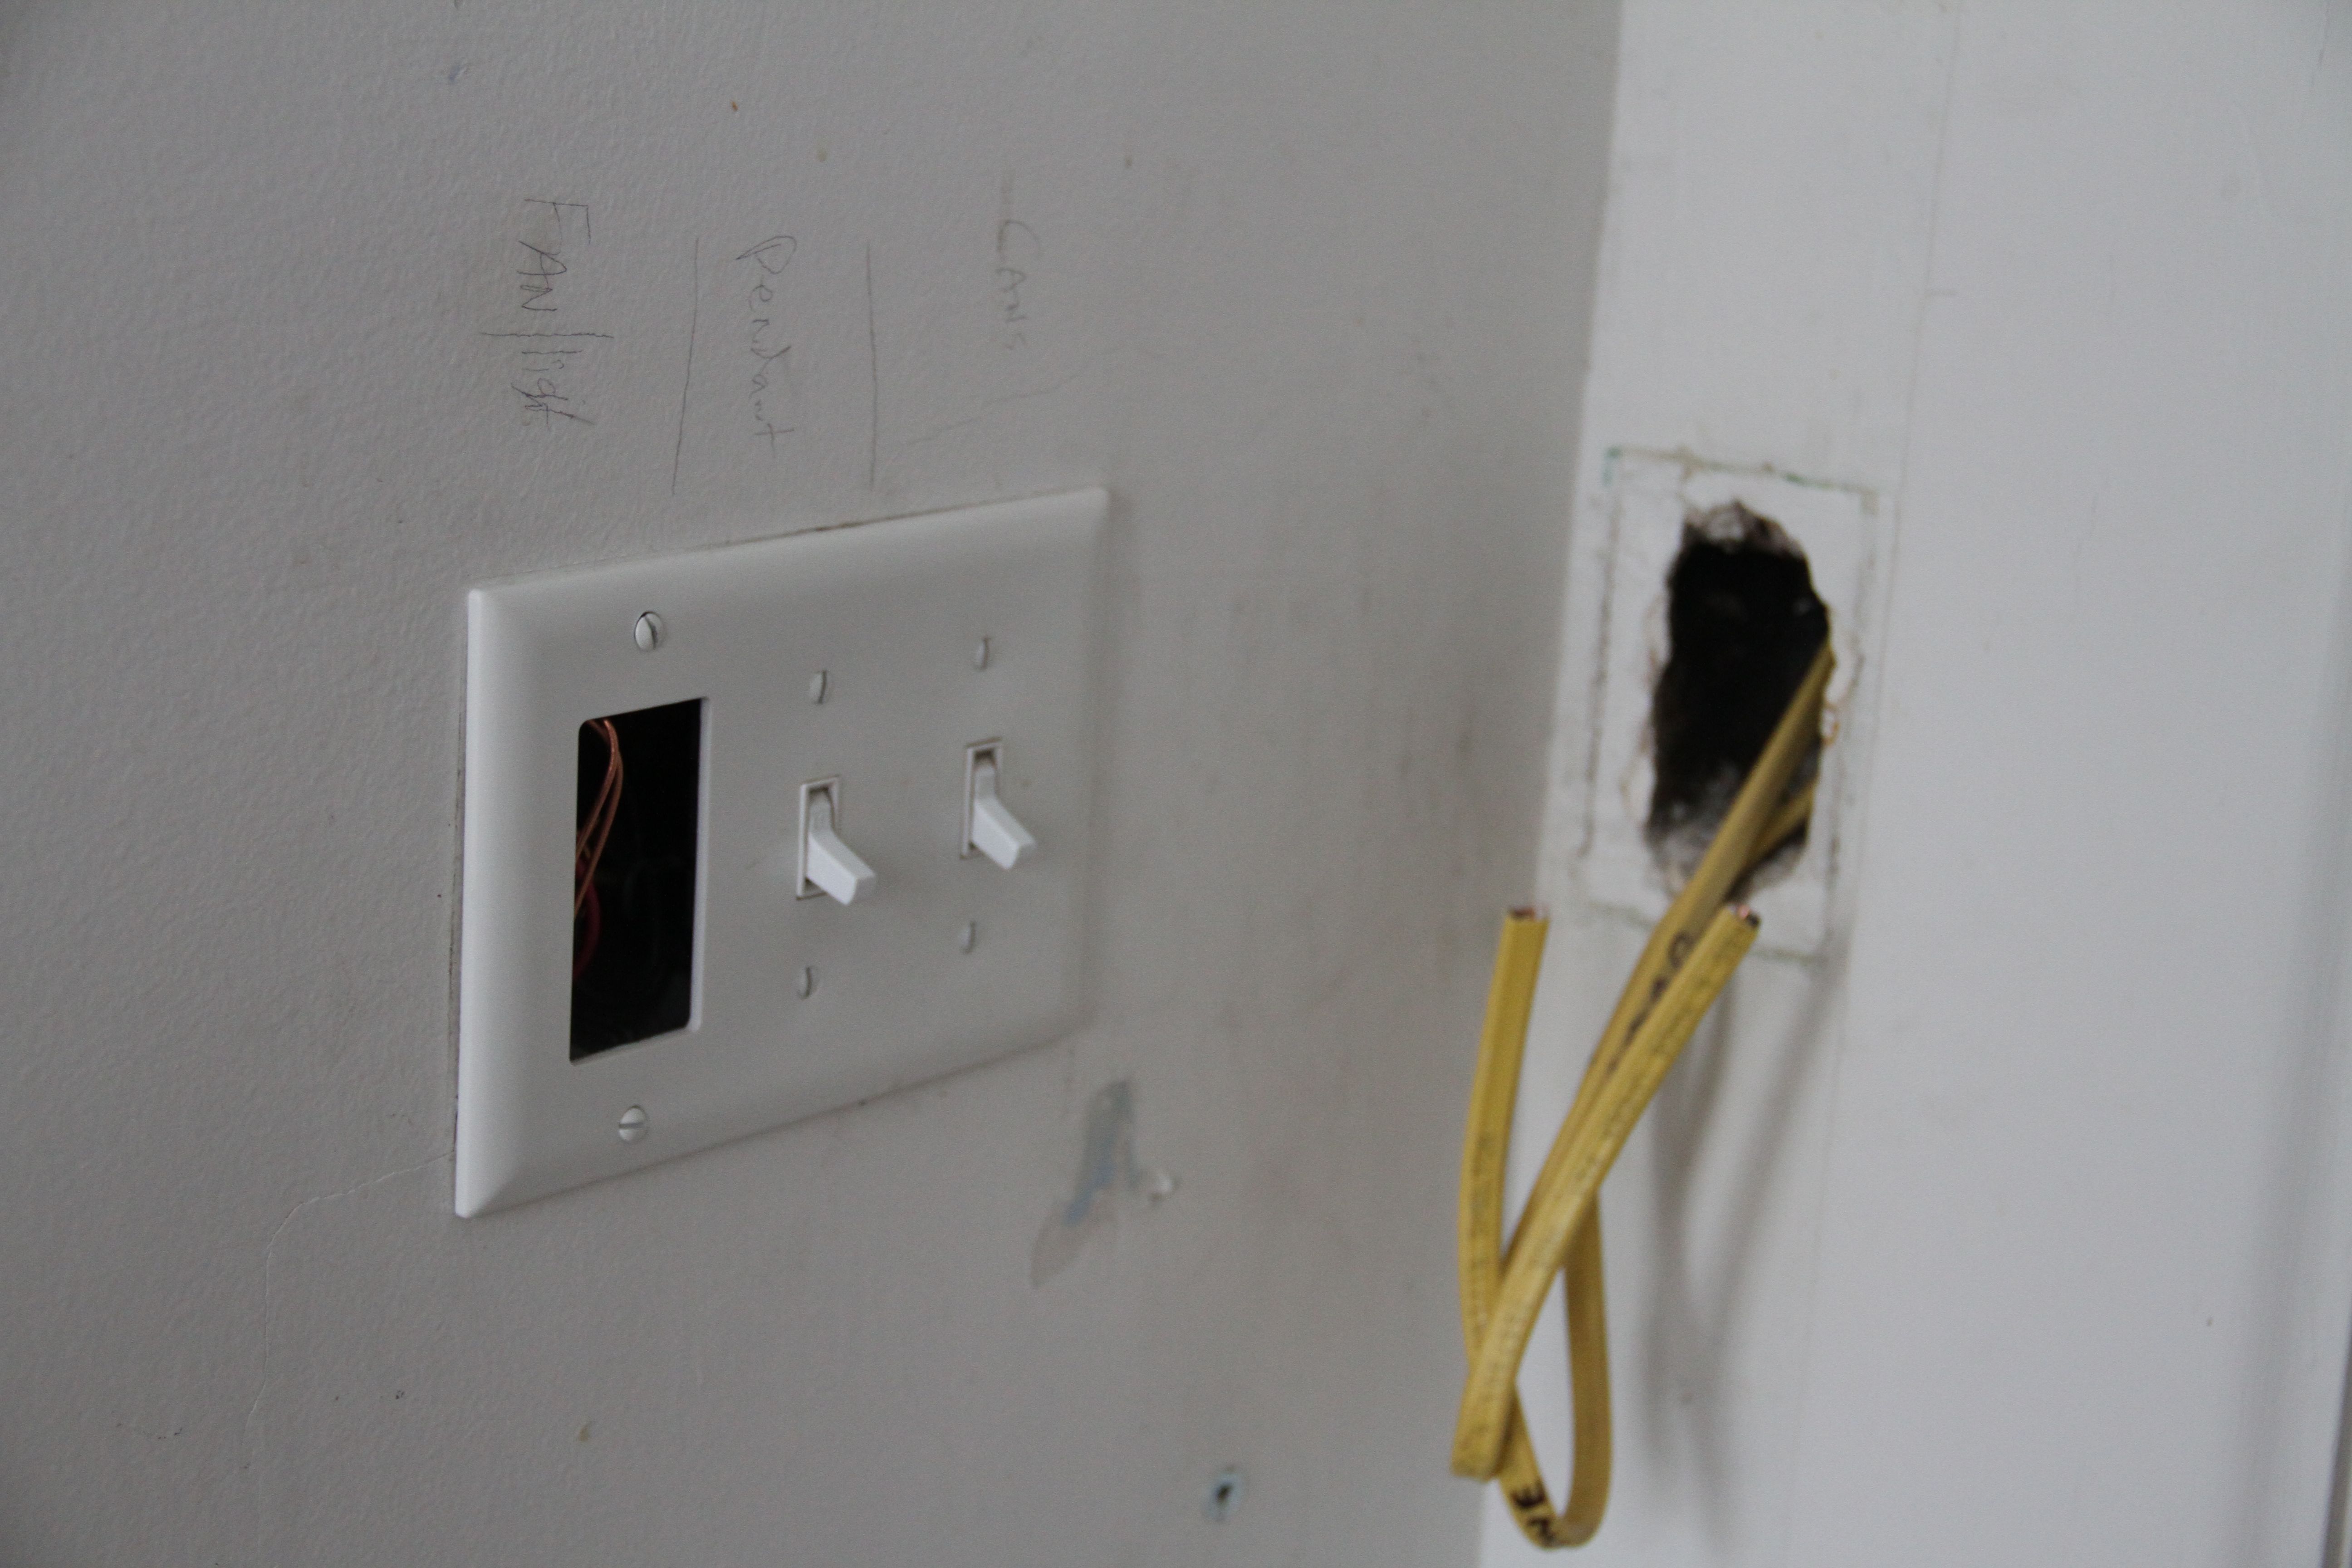 We were able to use some existing holes in the walls for the thermostat for the floor mat (where those yellow wires are). The light switch plate will house a new fan switch, as well as two dimmers for general lighting, and a decorative pendant.